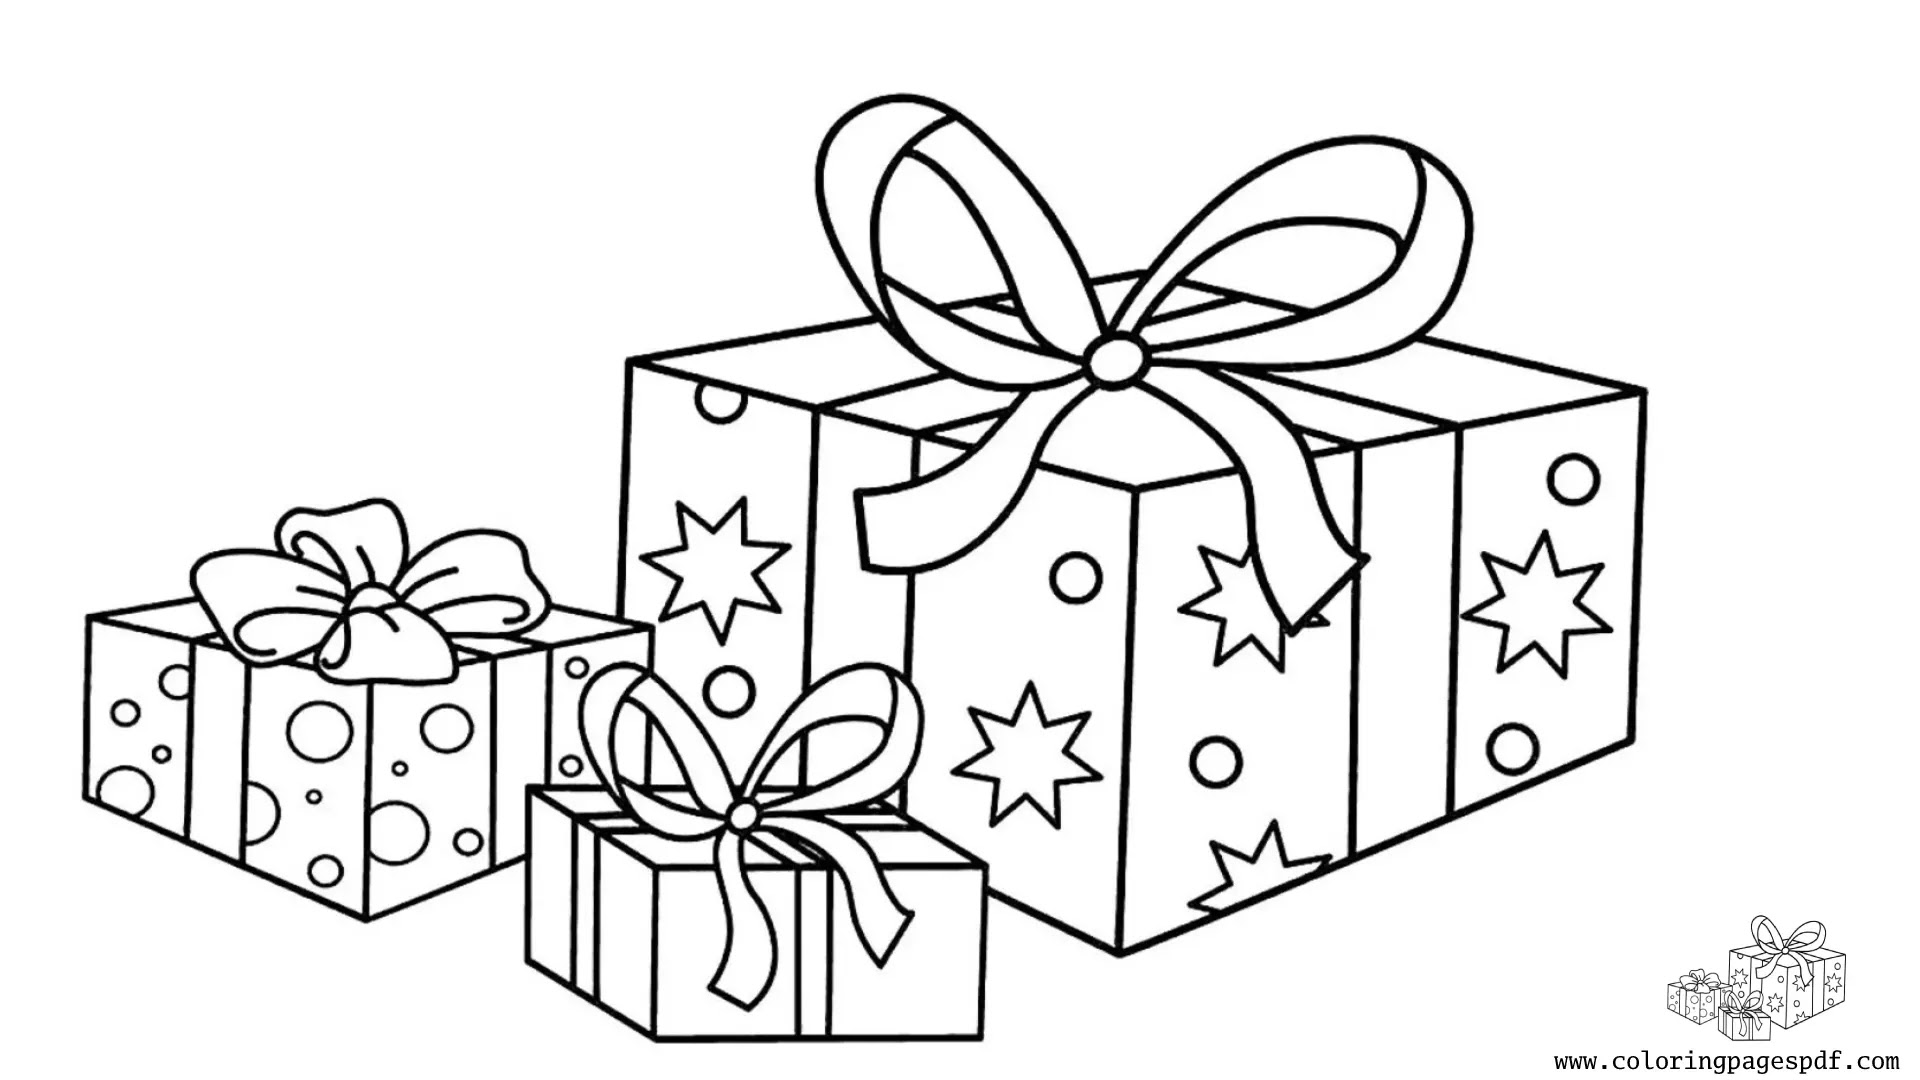 Coloring Page Of Christmas Gifts